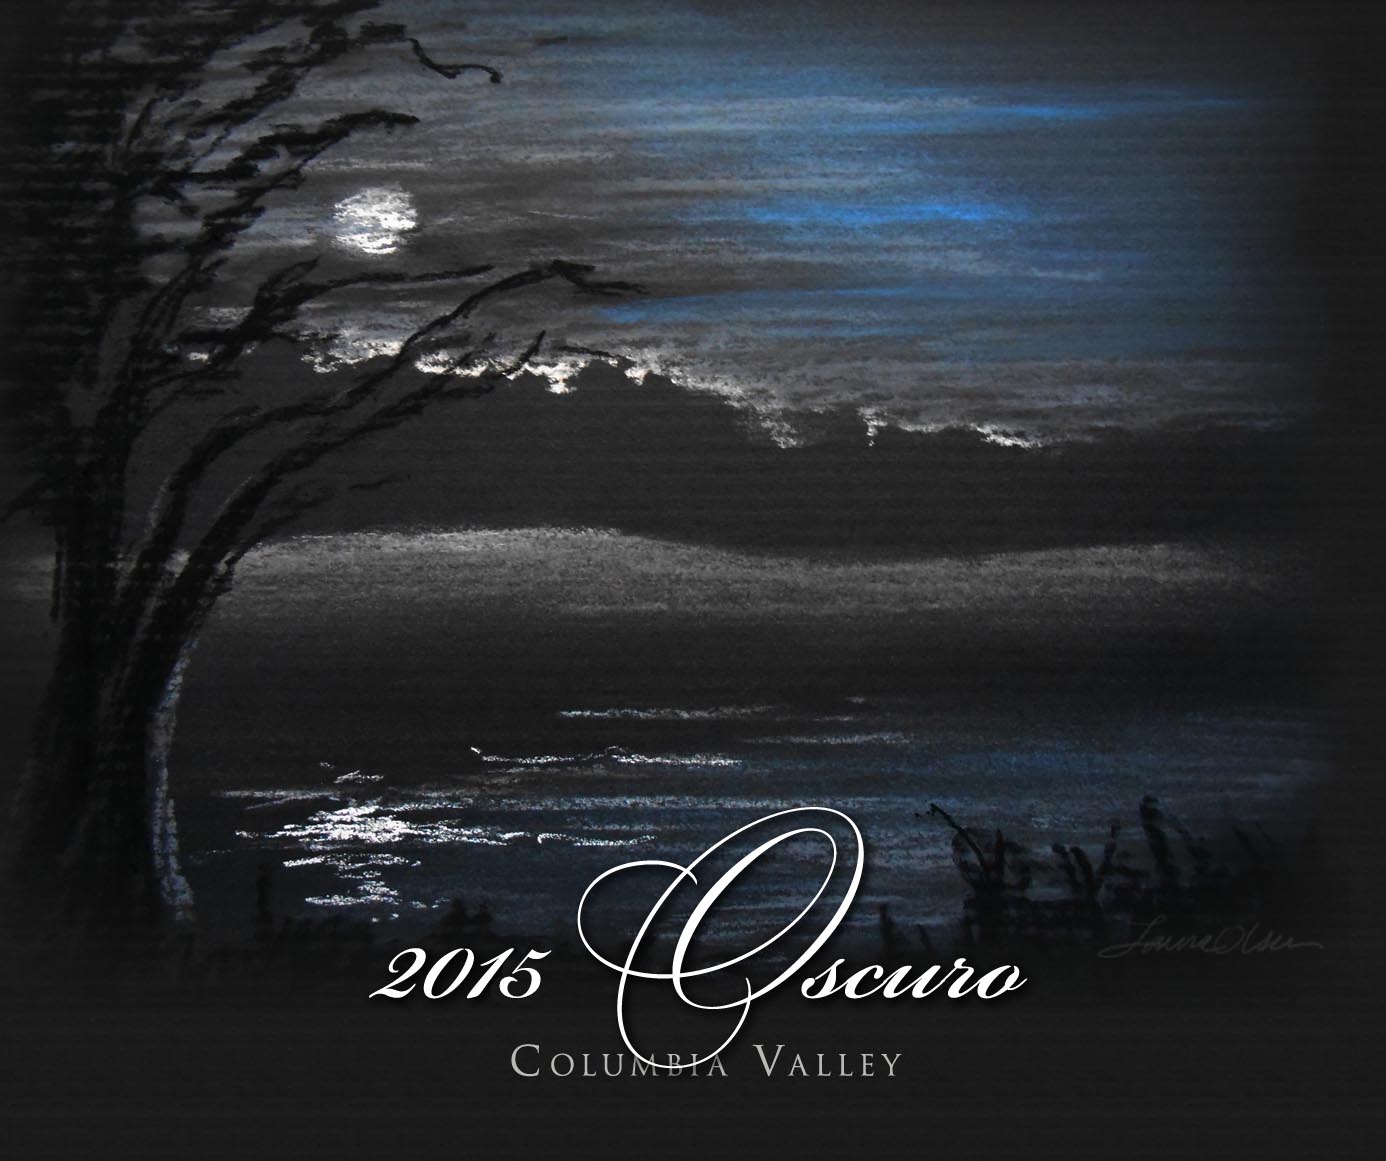 2015 Oscuro Columbia Valley